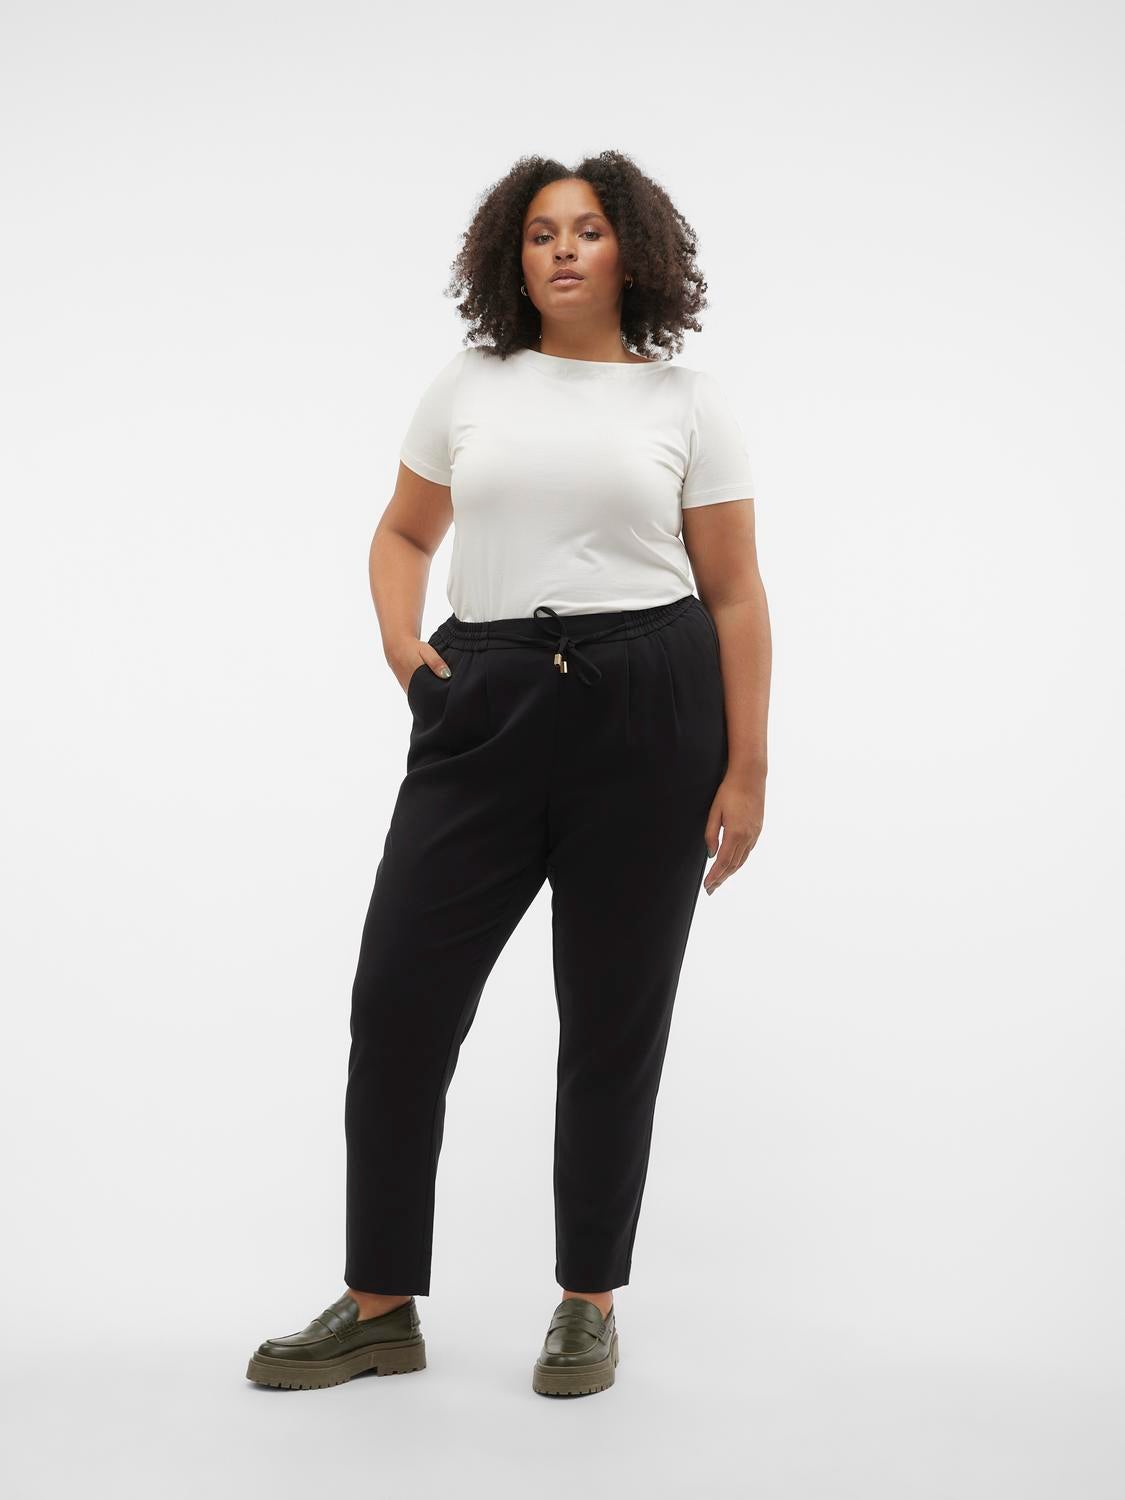 Buy KIMCURVY Plus Size Cropped Paper Bag Pants for Women High Waist Pants  with Bow-Knot Pockets for Work and Casual Days, Black, 16 Plus at Amazon.in